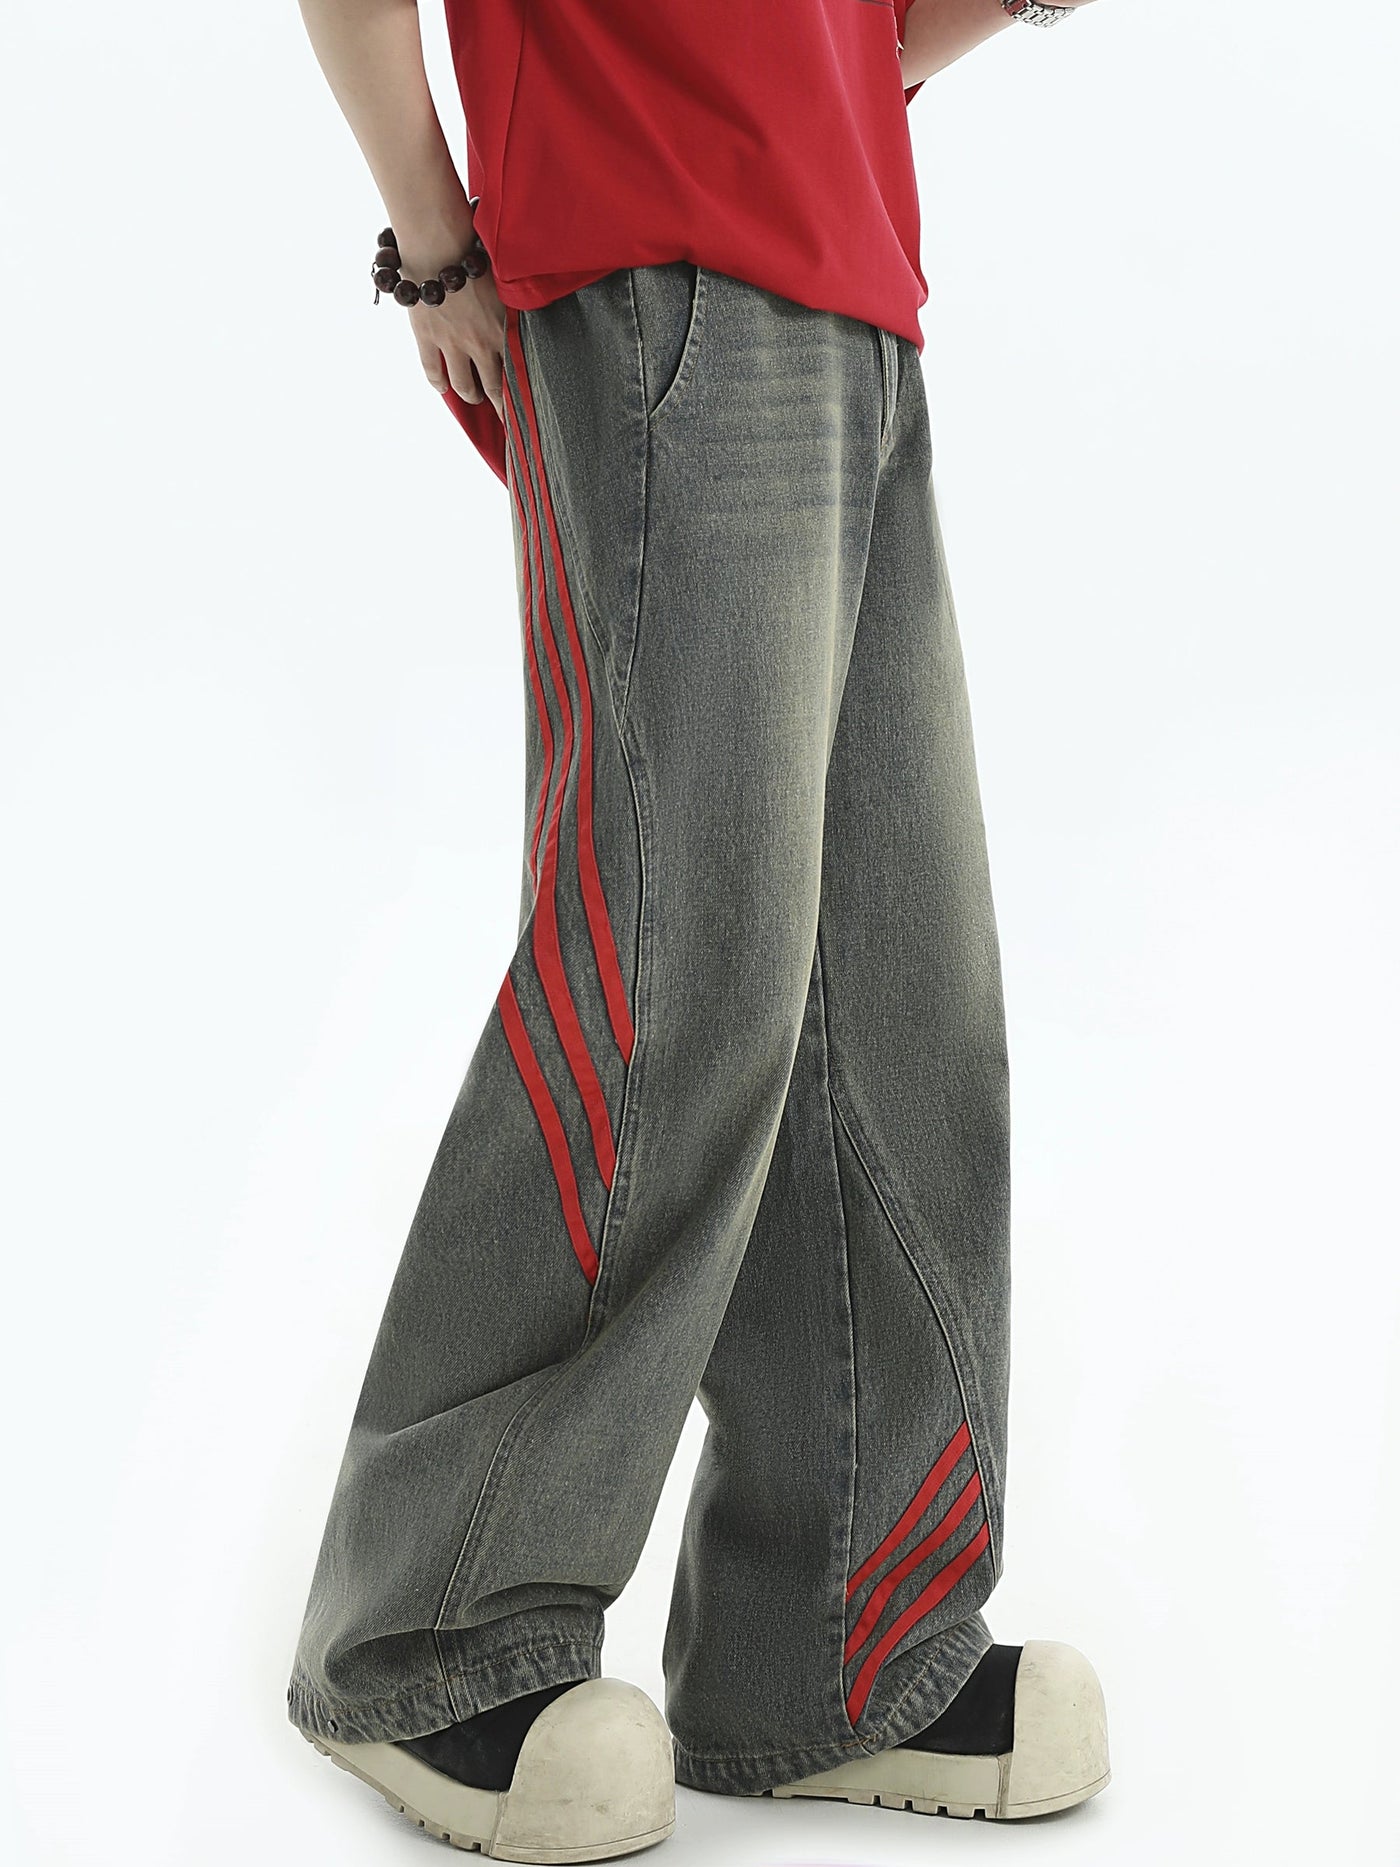 Red Lines Bootcut Jeans Korean Street Fashion Jeans By INS Korea Shop Online at OH Vault